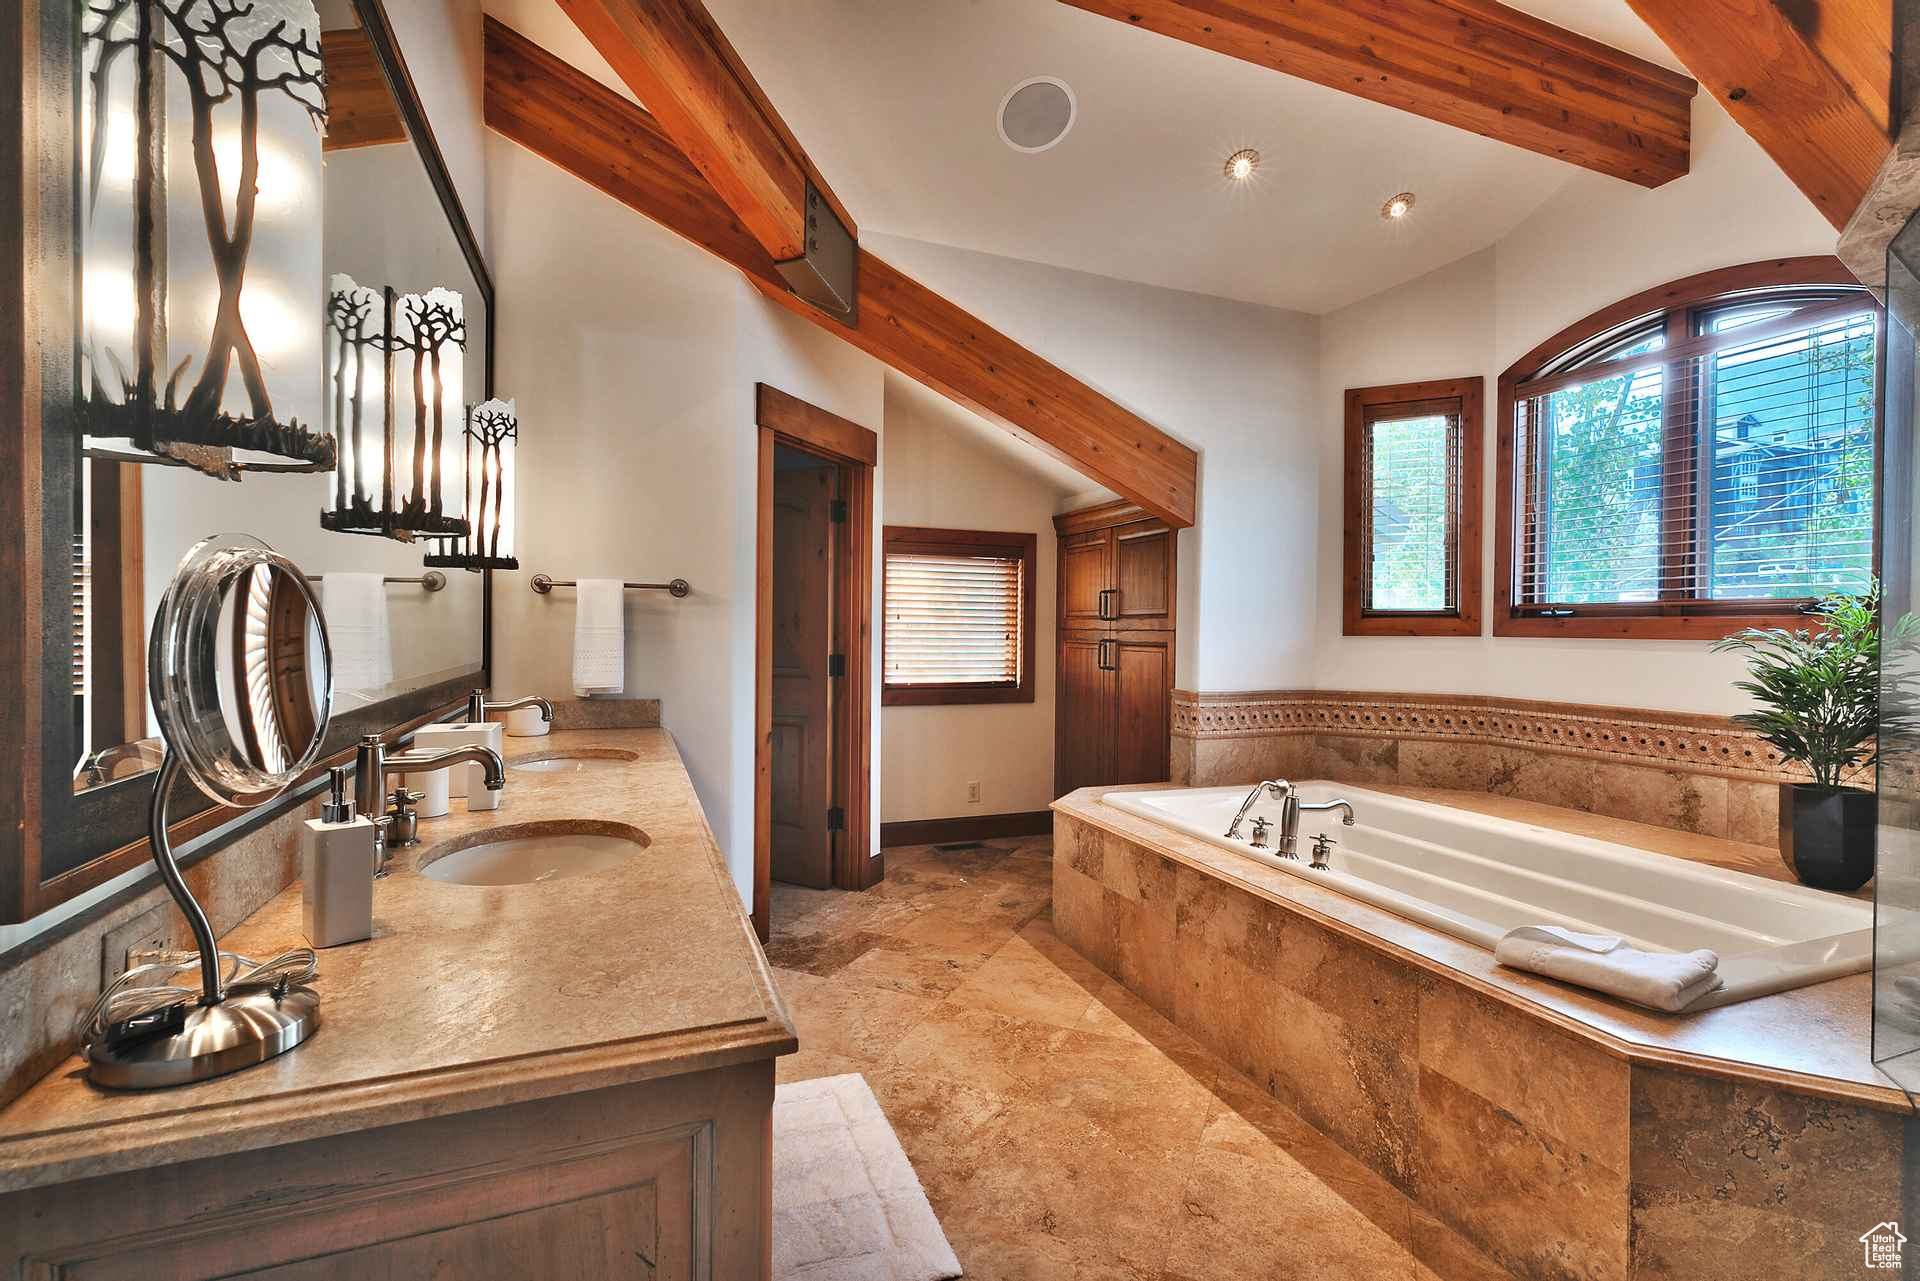 Bathroom with tiled bath, vanity, lofted ceiling with beams, and tile flooring